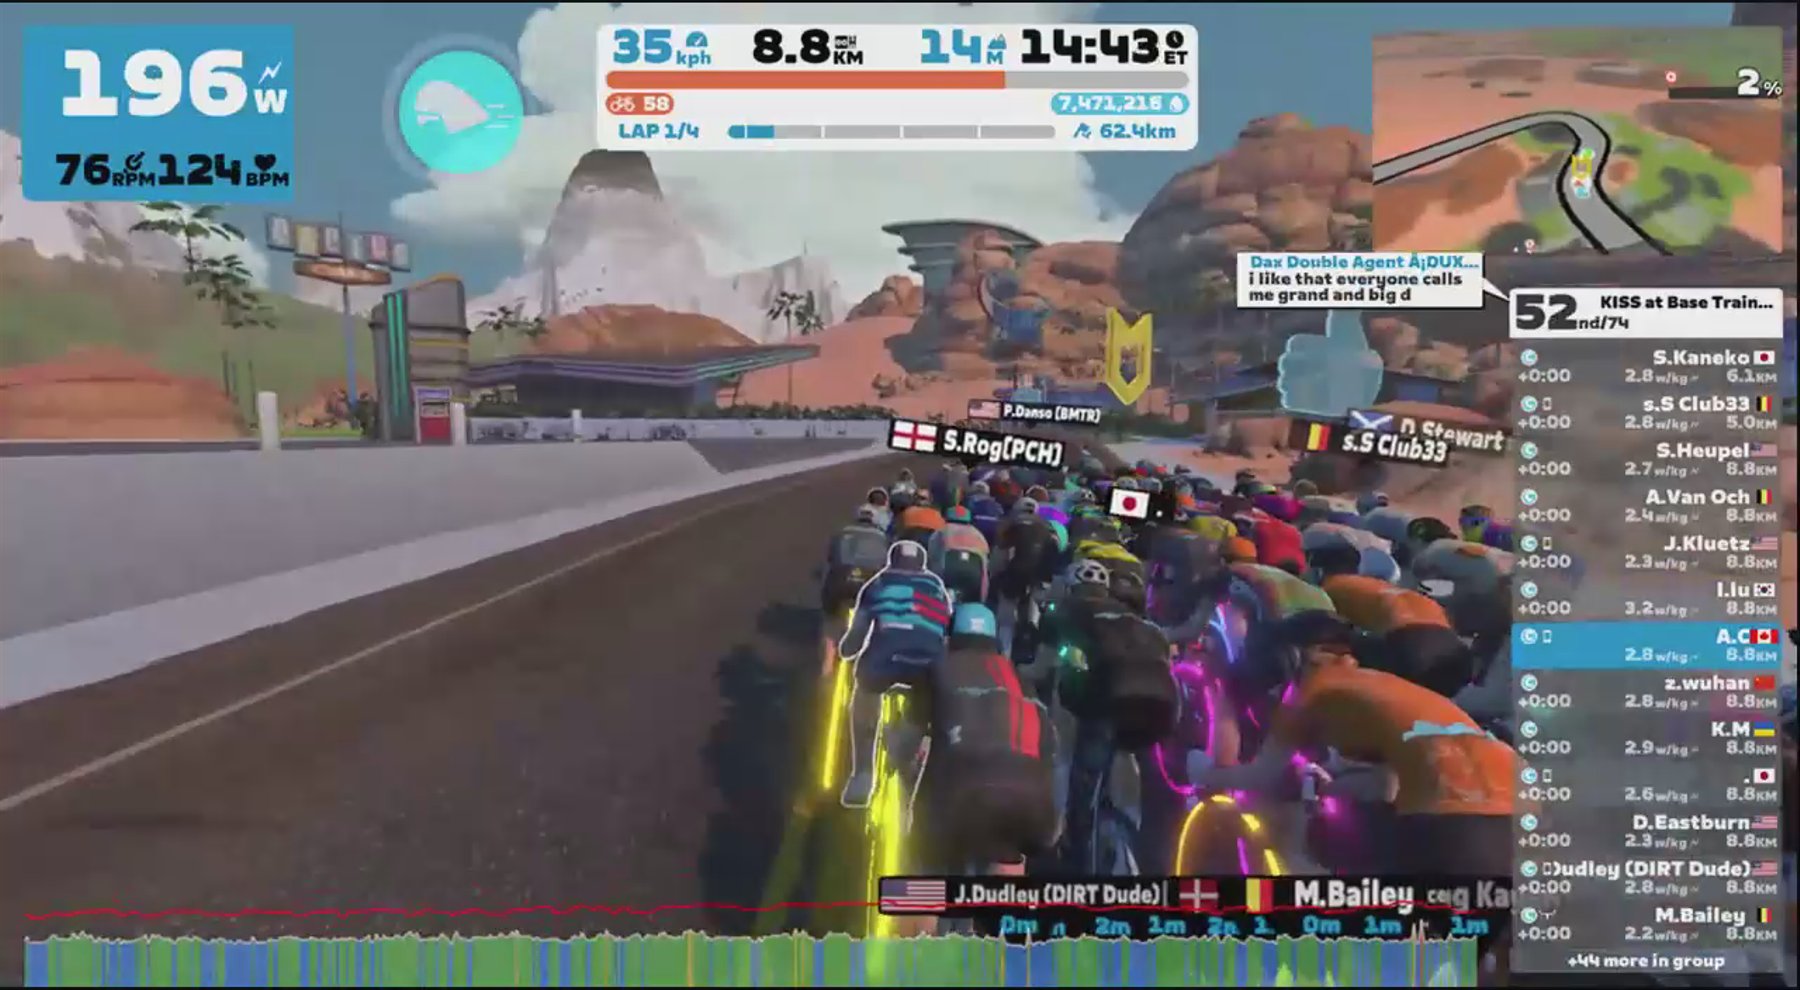 Zwift - Group Ride: KISS at Base Training Ride (C) on Tempus Fugit in Watopia